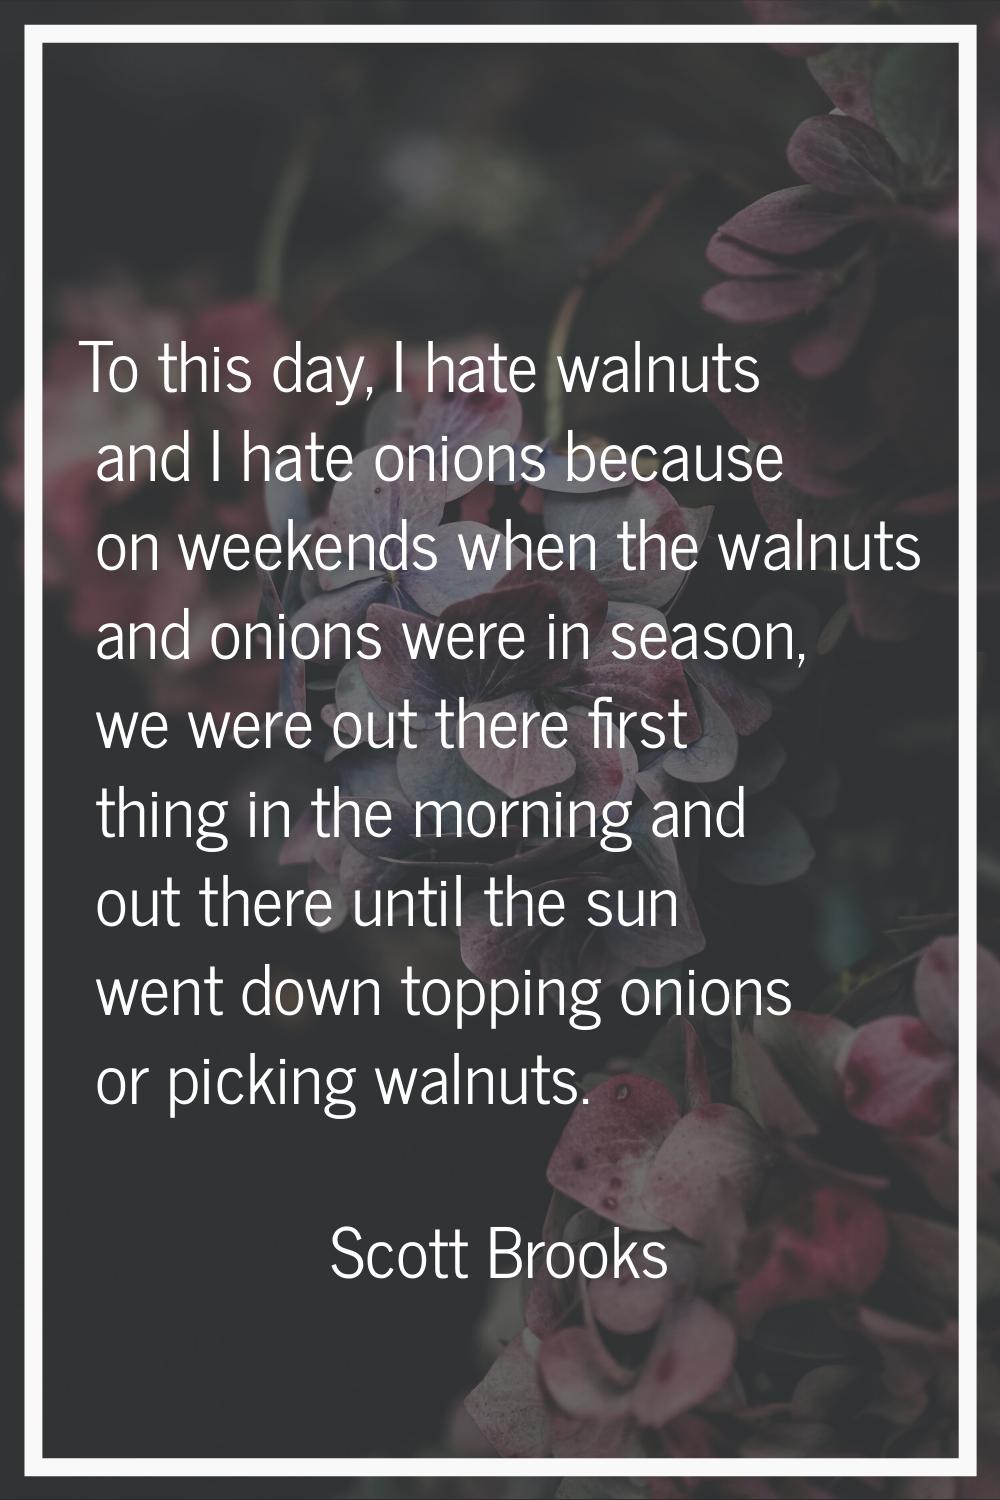 To this day, I hate walnuts and I hate onions because on weekends when the walnuts and onions were 